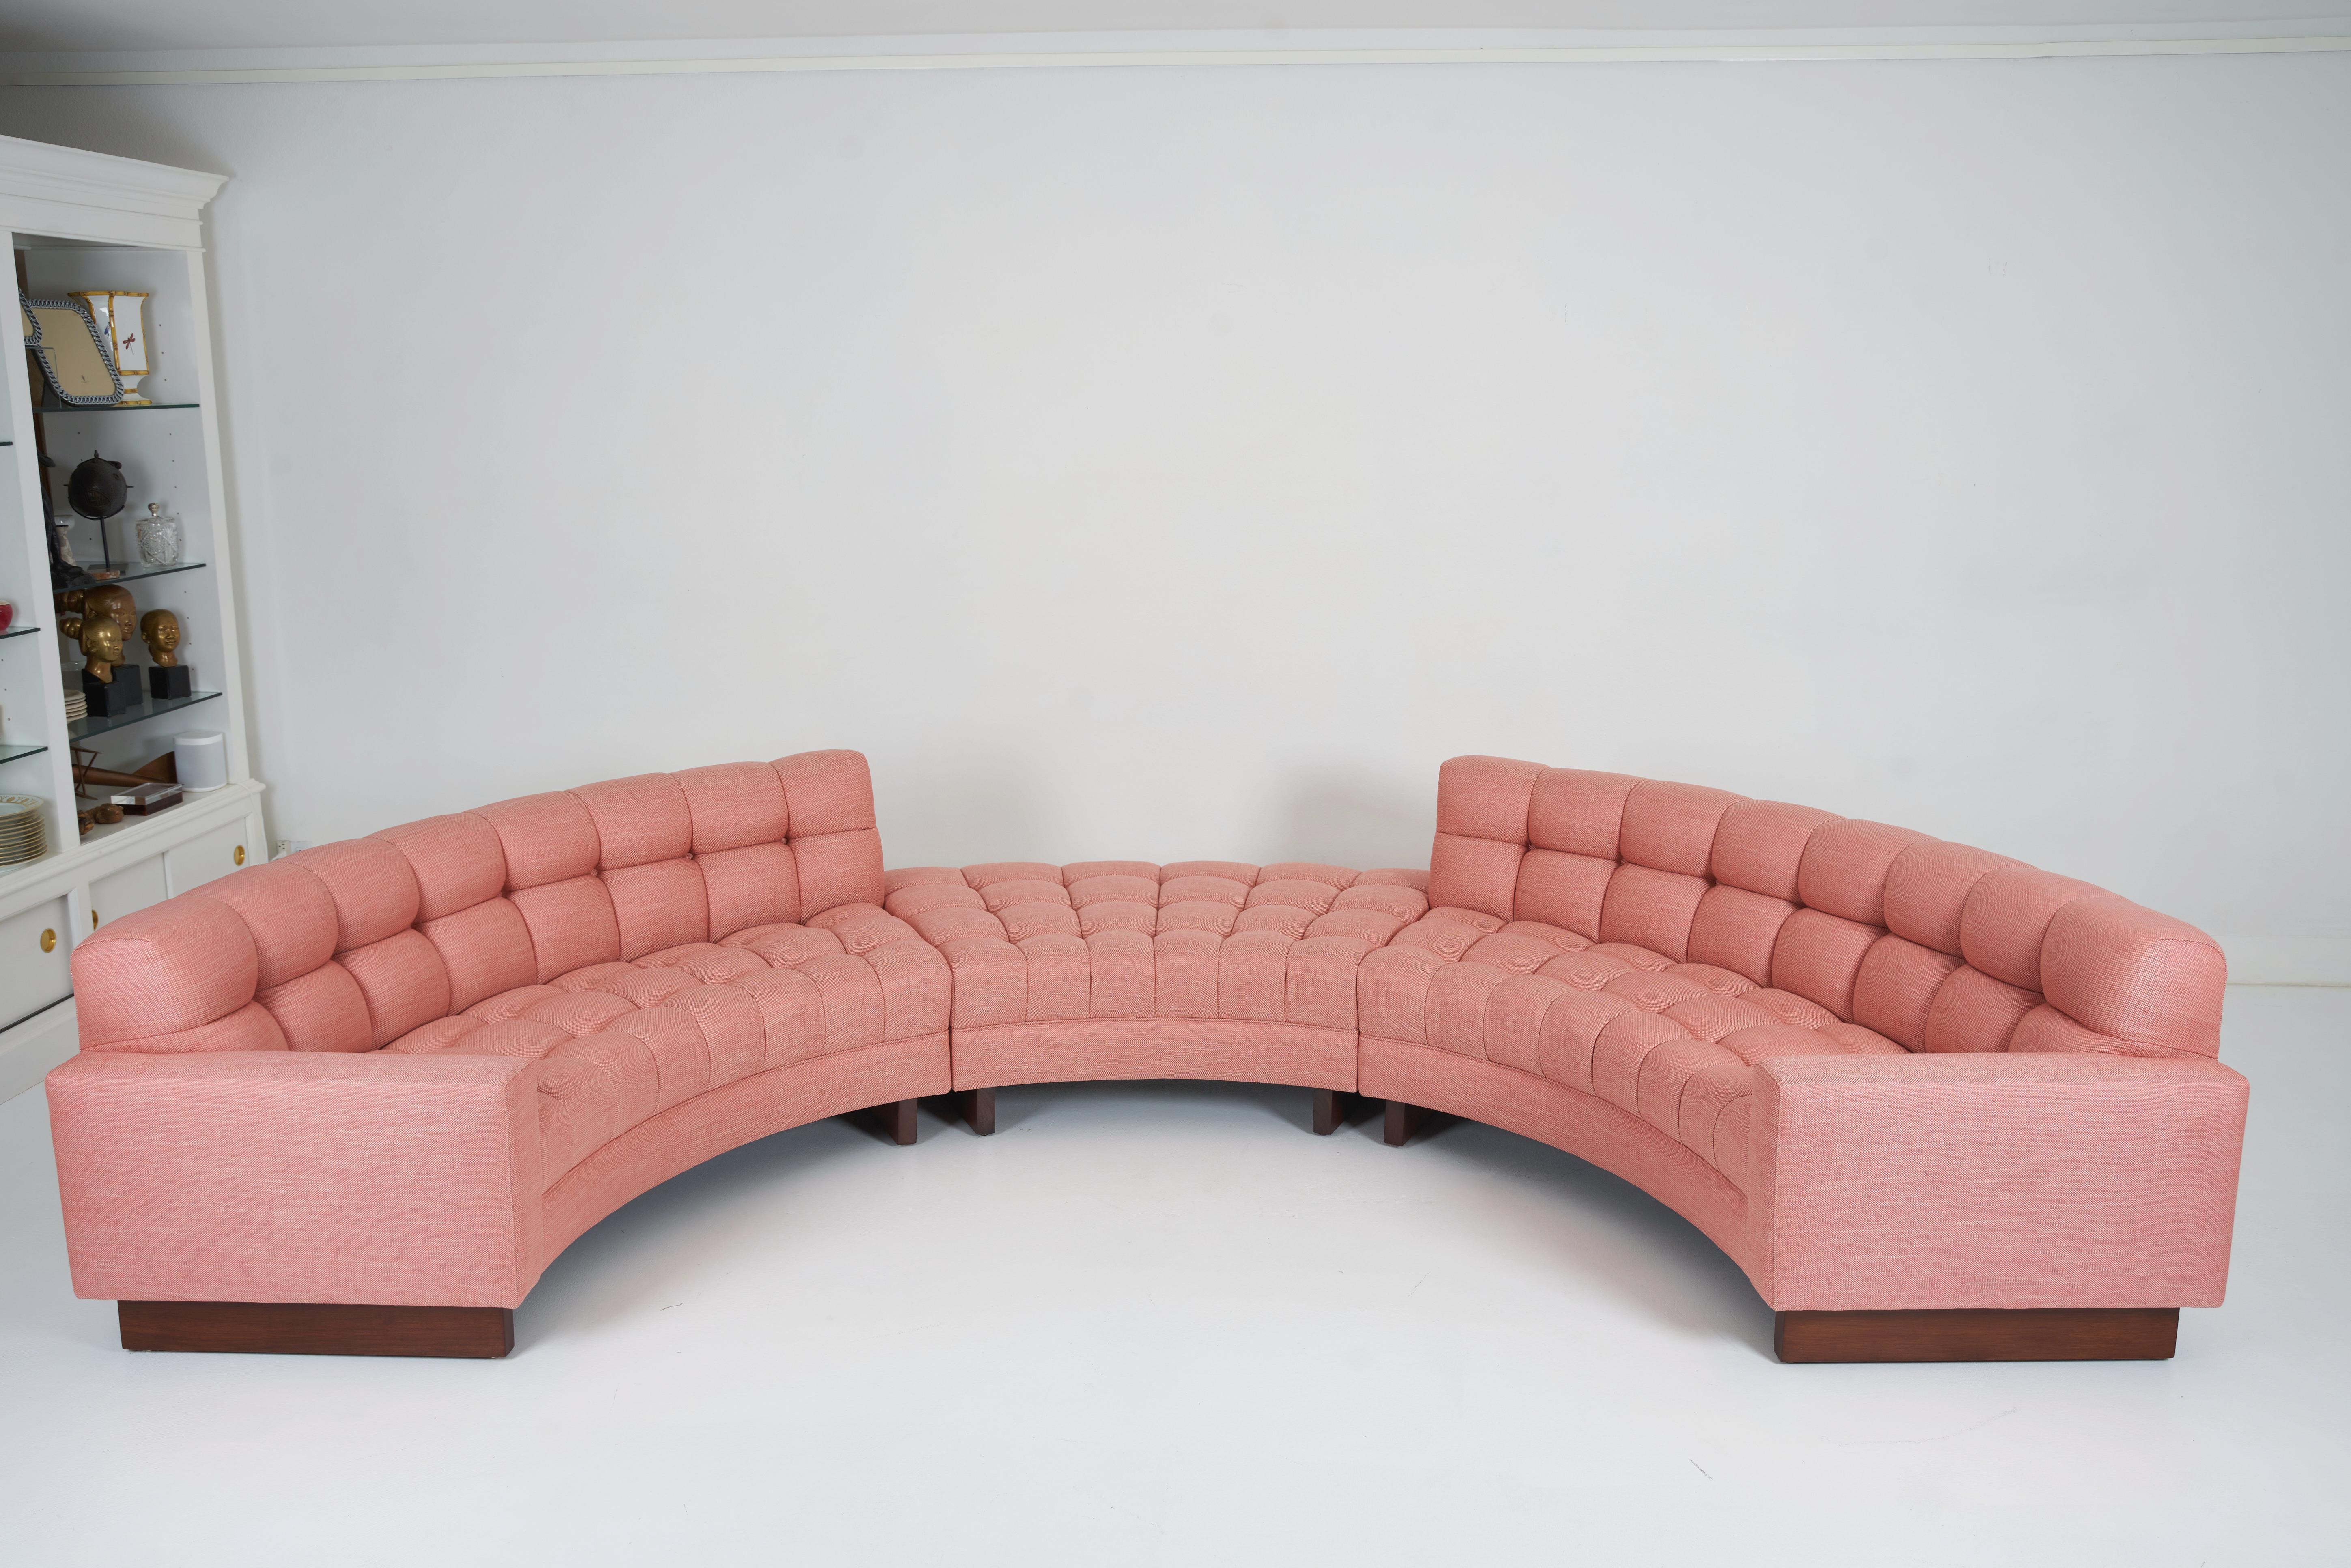 American Biscuit Tufted, Guava Colored, Curved Three Piece Sectional by William Haines